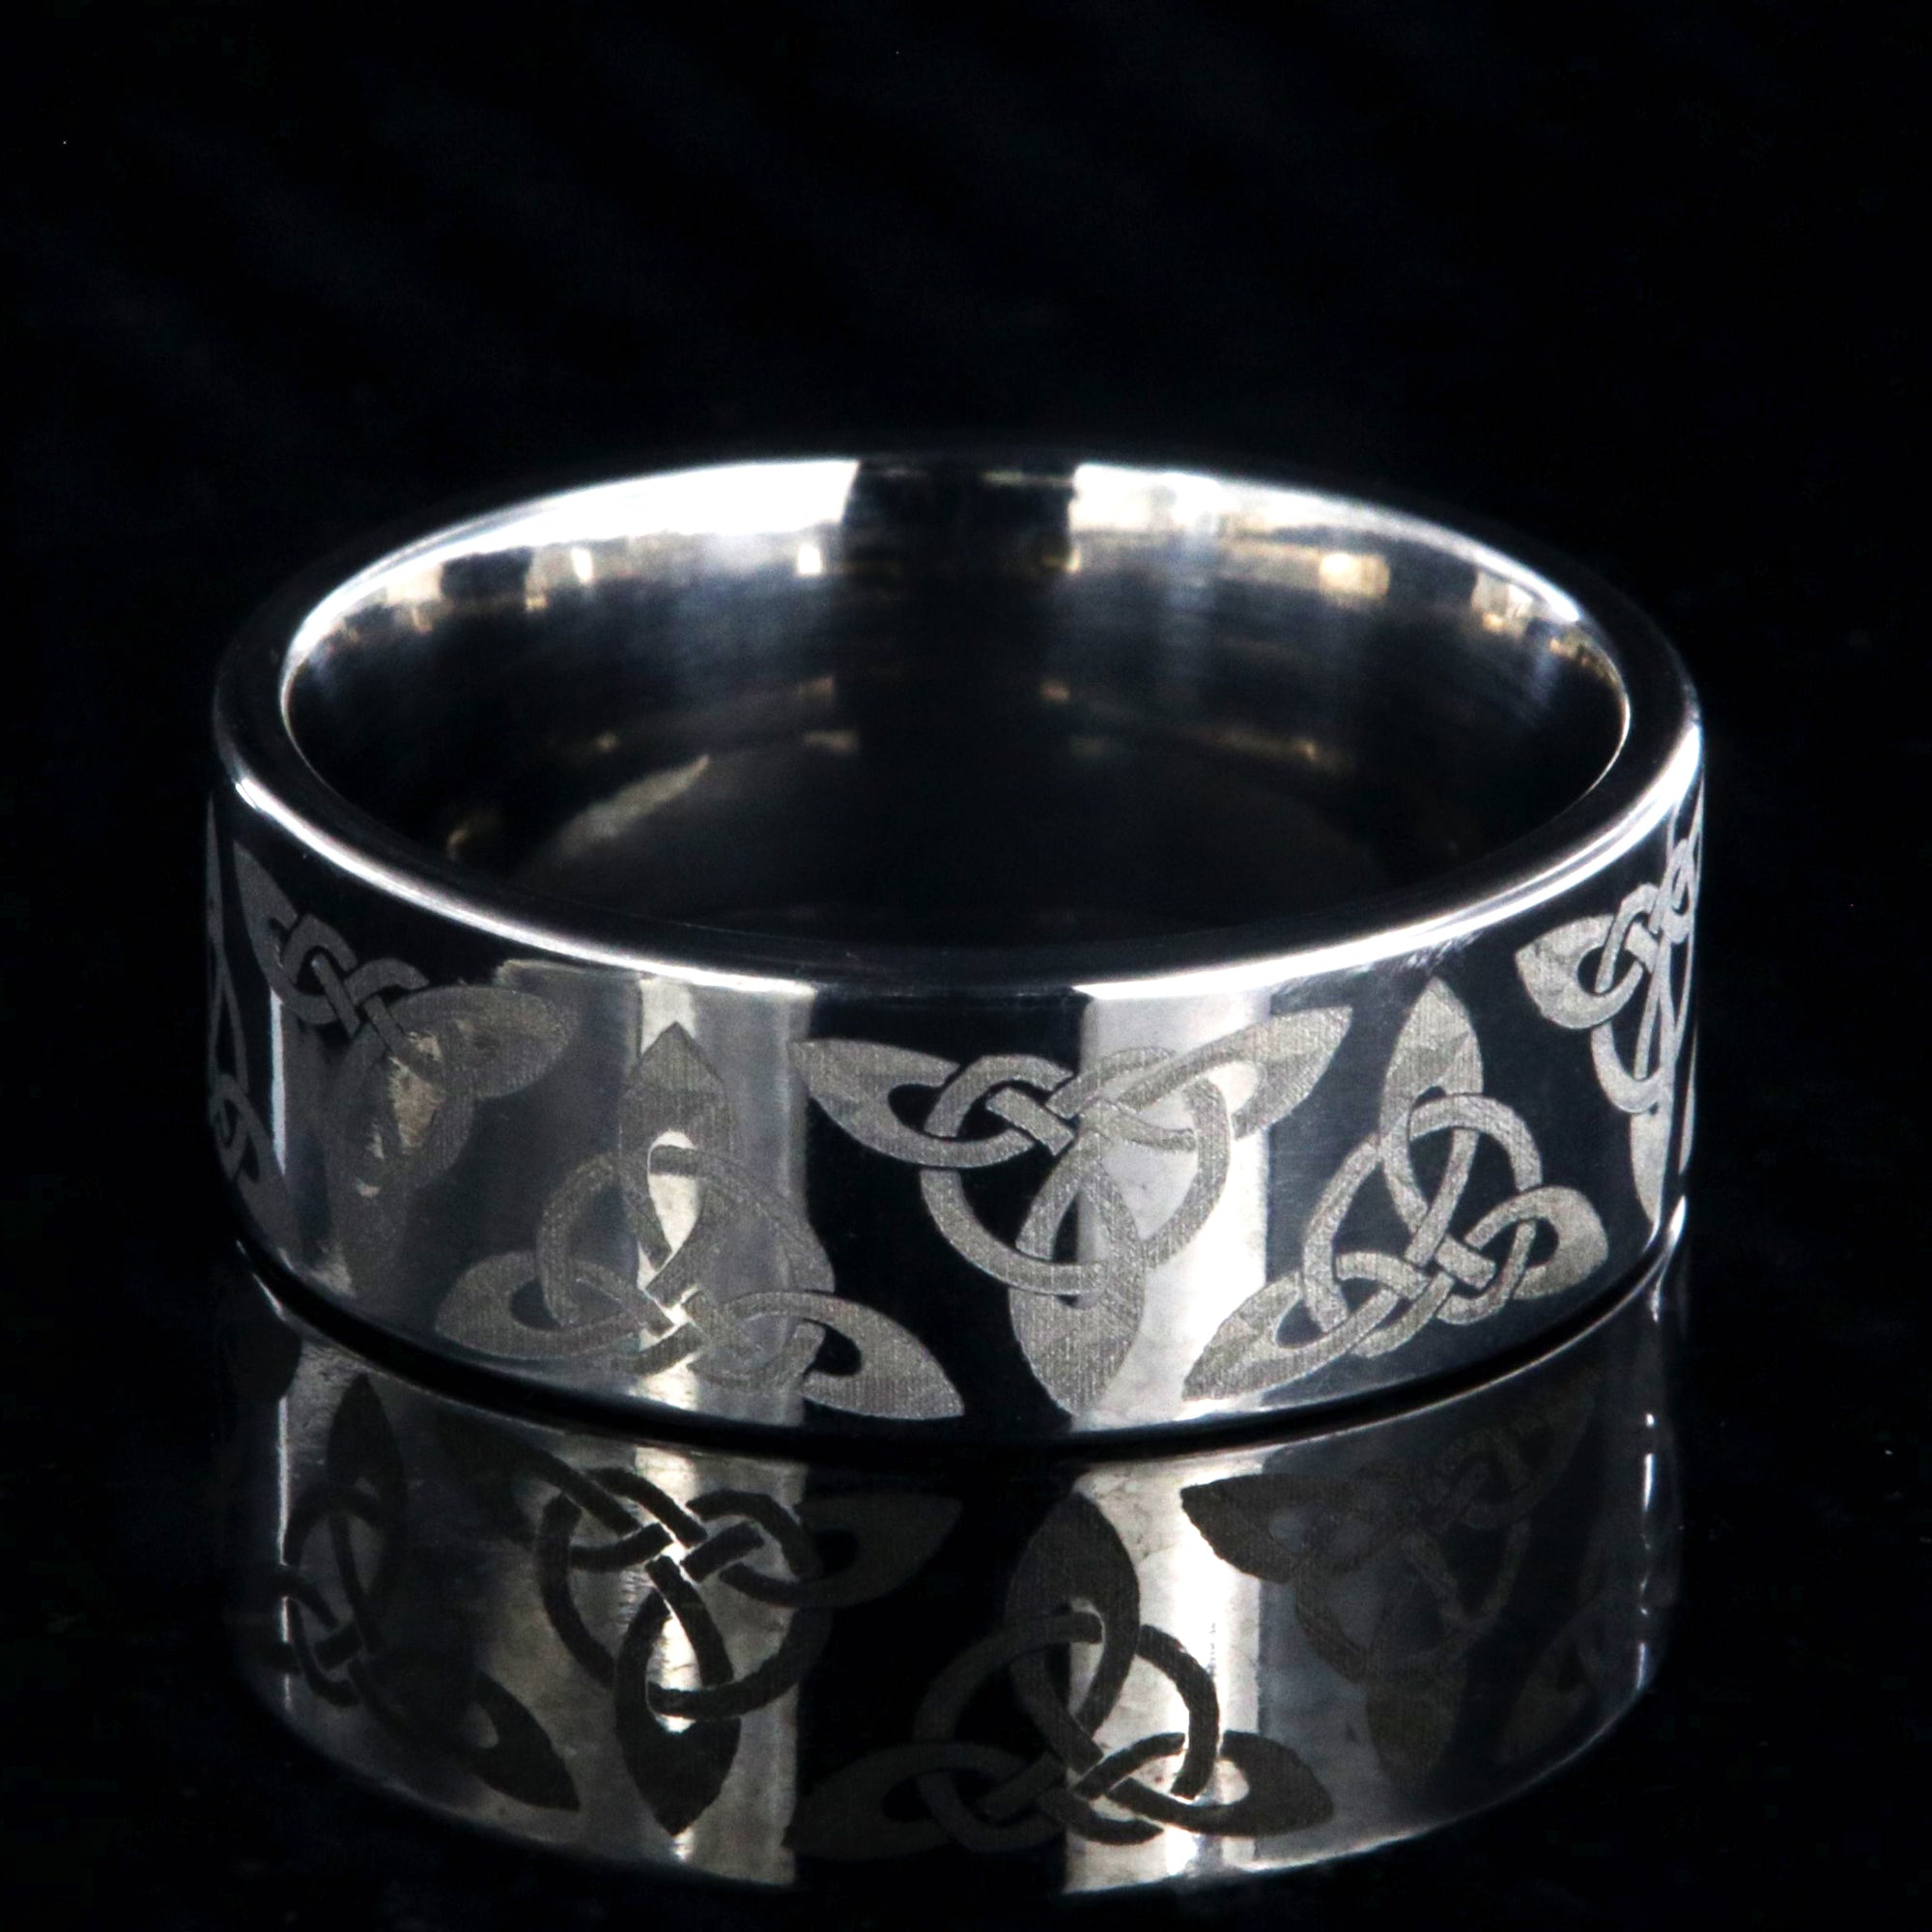 8mm wide titanium ring with a Celtic trinity know design and a flat profile